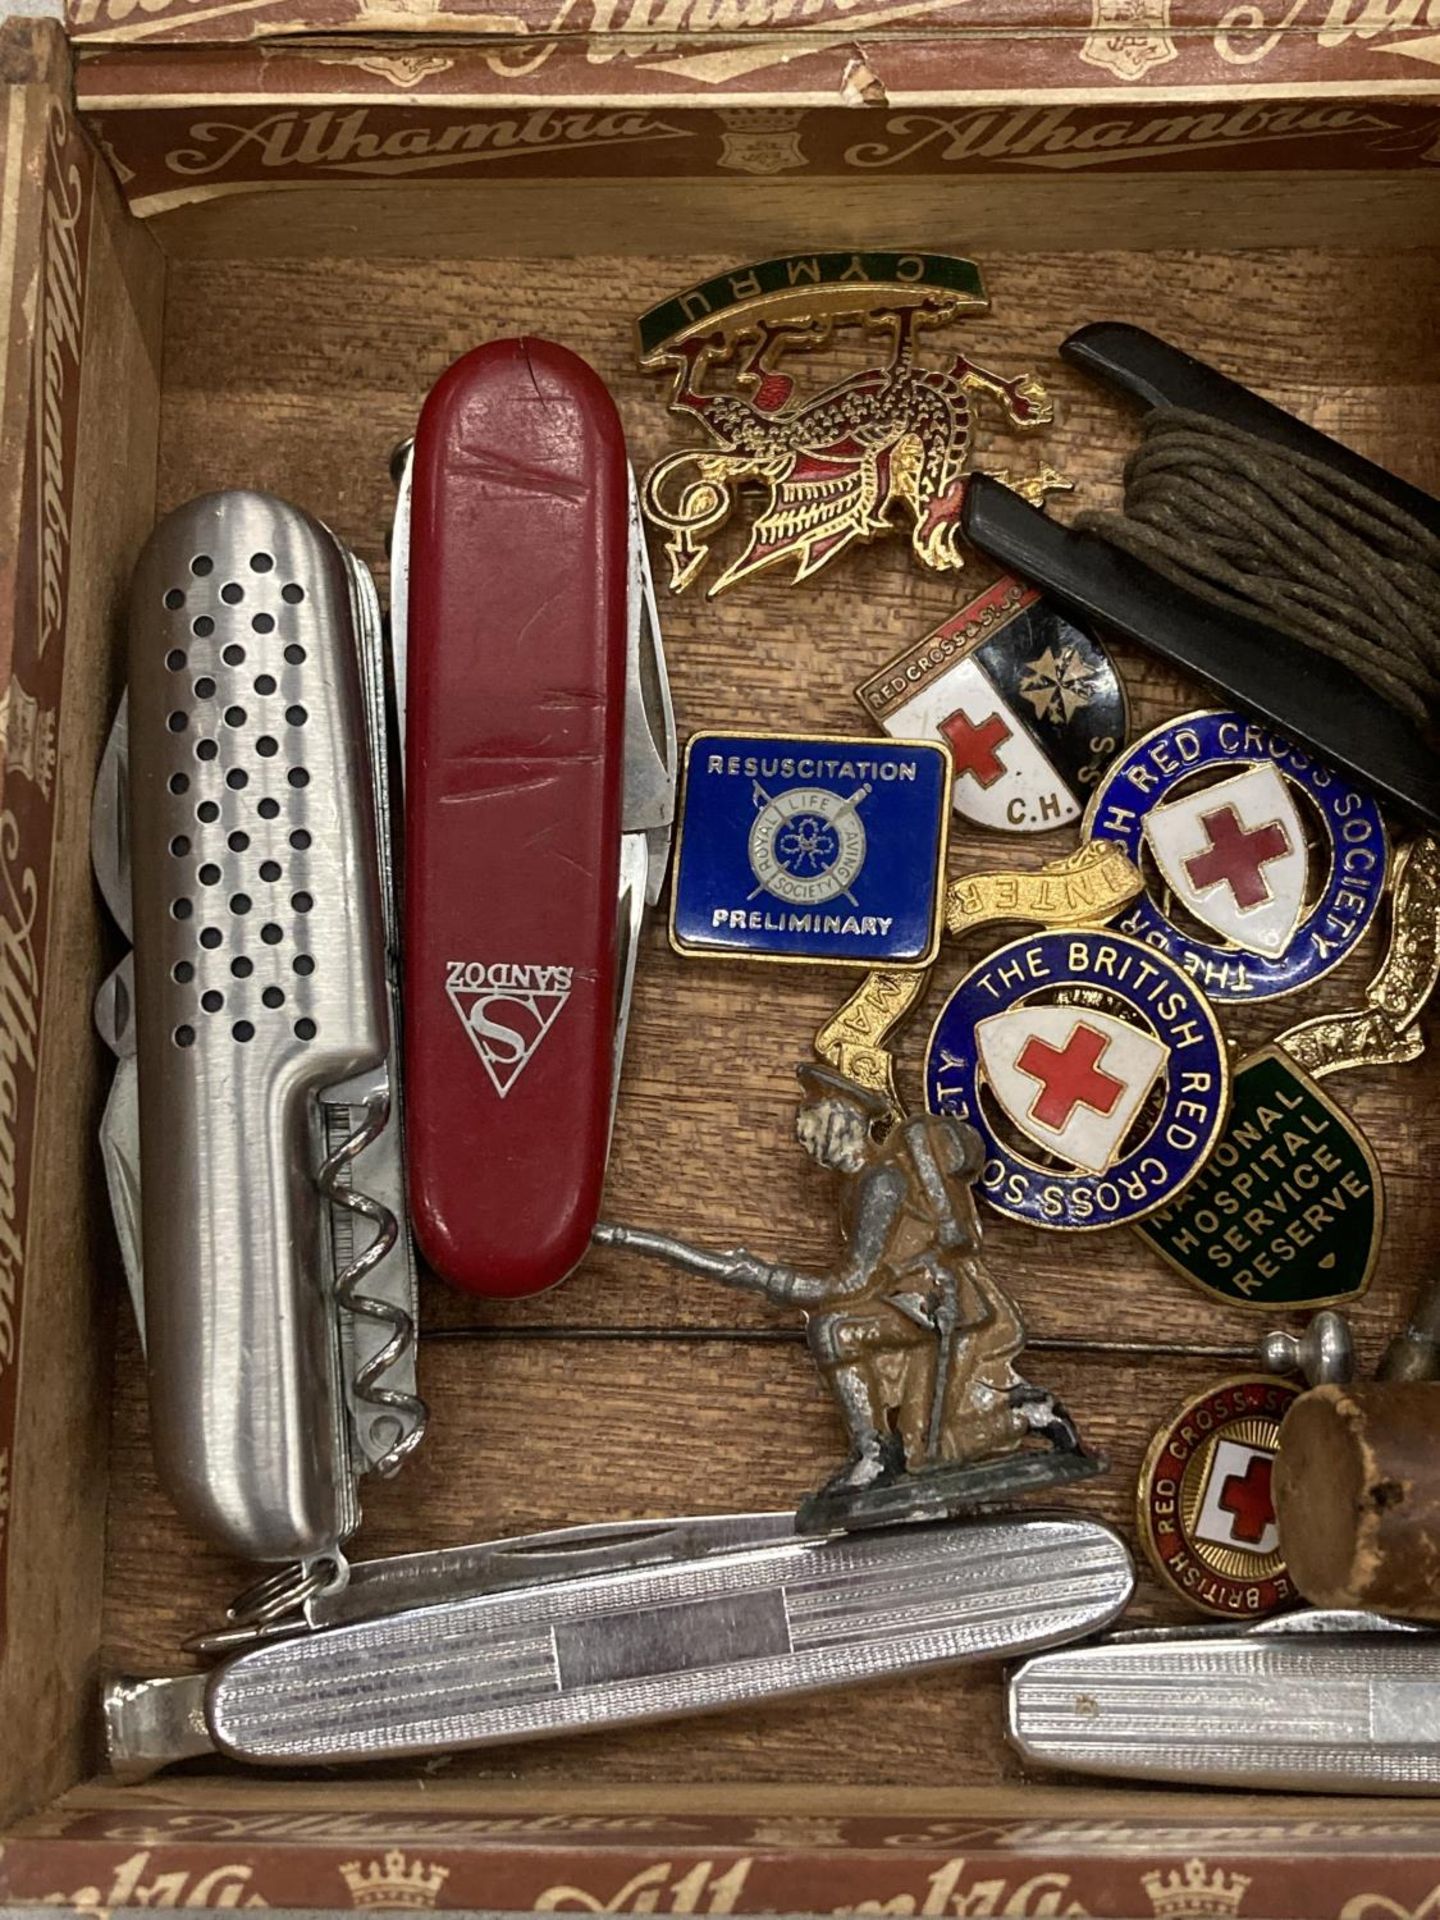 A CIGAR BOX CONTAINING VINTAGE PENKNIVES, RED CROSS BADGES, A BOTTLE STOPPER WITH WHITE METAL DUCK - Image 2 of 4